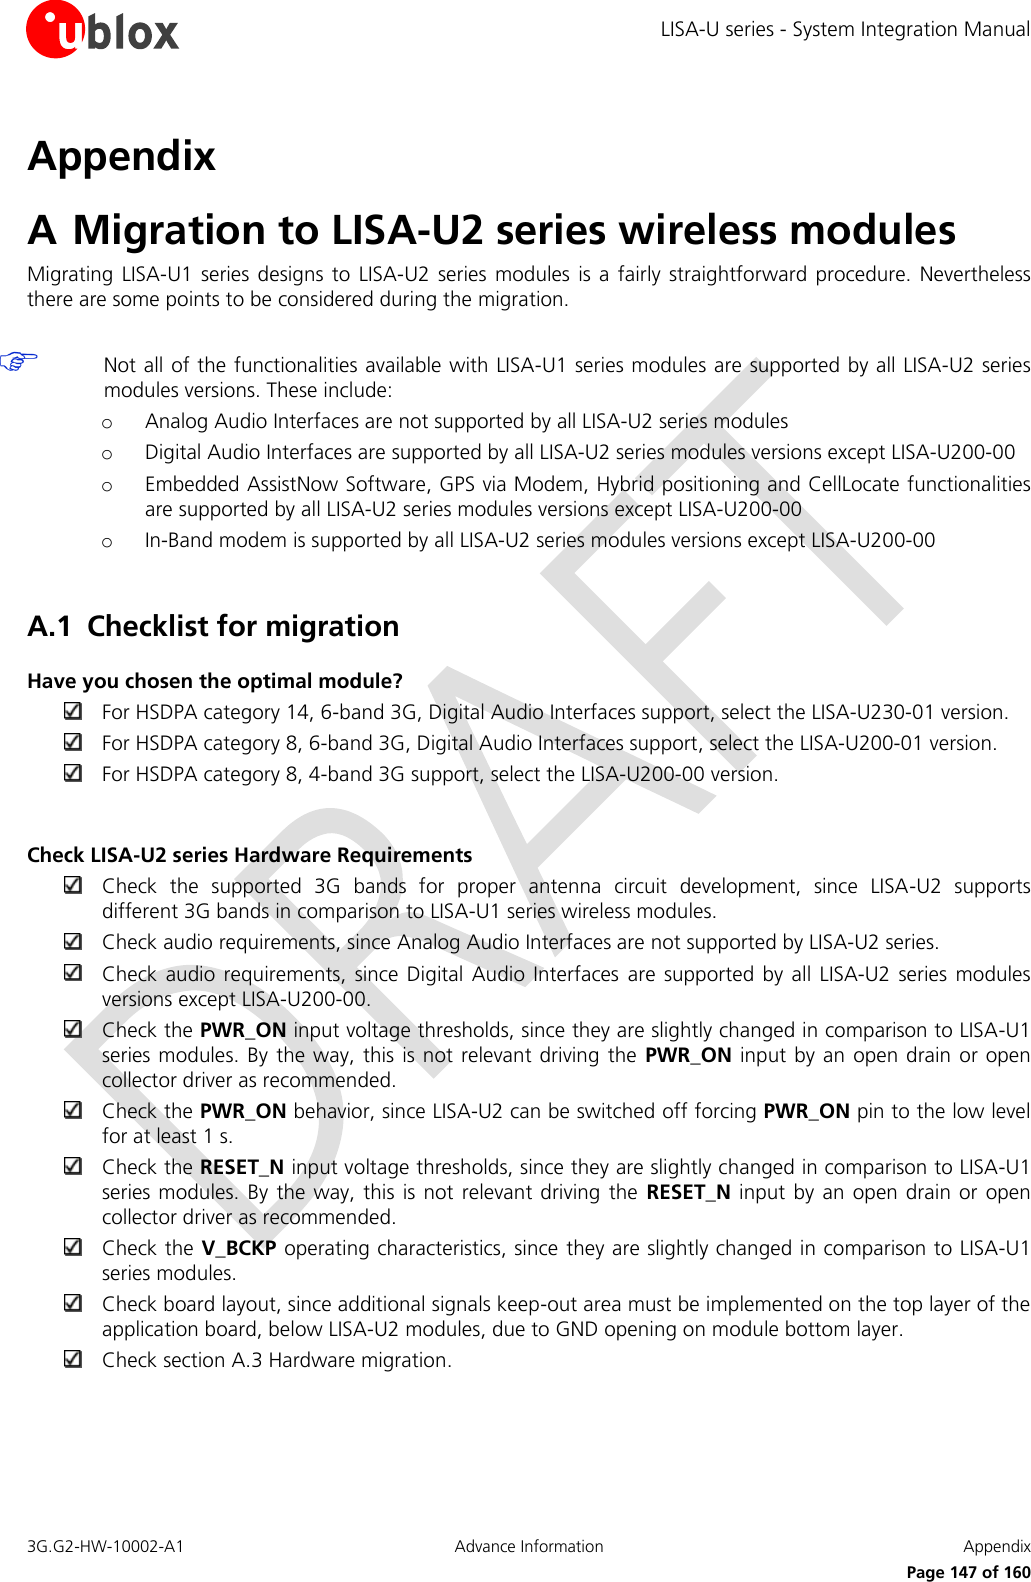 LISA-U series - System Integration Manual 3G.G2-HW-10002-A1  Advance Information  Appendix      Page 147 of 160 Appendix A Migration to LISA-U2 series wireless modules Migrating  LISA-U1  series designs  to LISA-U2  series modules  is a  fairly  straightforward  procedure.  Nevertheless there are some points to be considered during the migration.   Not all of the functionalities available with LISA-U1 series modules are supported by all LISA-U2 series modules versions. These include: o Analog Audio Interfaces are not supported by all LISA-U2 series modules o Digital Audio Interfaces are supported by all LISA-U2 series modules versions except LISA-U200-00 o Embedded AssistNow Software, GPS via Modem, Hybrid positioning and CellLocate functionalities are supported by all LISA-U2 series modules versions except LISA-U200-00 o In-Band modem is supported by all LISA-U2 series modules versions except LISA-U200-00  A.1 Checklist for migration Have you chosen the optimal module?  For HSDPA category 14, 6-band 3G, Digital Audio Interfaces support, select the LISA-U230-01 version.  For HSDPA category 8, 6-band 3G, Digital Audio Interfaces support, select the LISA-U200-01 version.  For HSDPA category 8, 4-band 3G support, select the LISA-U200-00 version.  Check LISA-U2 series Hardware Requirements  Check  the  supported  3G  bands  for  proper  antenna  circuit  development,  since  LISA-U2  supports different 3G bands in comparison to LISA-U1 series wireless modules.  Check audio requirements, since Analog Audio Interfaces are not supported by LISA-U2 series.  Check audio requirements,  since Digital  Audio Interfaces  are  supported by  all LISA-U2  series modules versions except LISA-U200-00.  Check the PWR_ON input voltage thresholds, since they are slightly changed in comparison to LISA-U1 series modules. By  the way,  this is not  relevant driving  the PWR_ON input by an  open drain  or open collector driver as recommended.  Check the PWR_ON behavior, since LISA-U2 can be switched off forcing PWR_ON pin to the low level for at least 1 s.  Check the RESET_N input voltage thresholds, since they are slightly changed in comparison to LISA-U1 series modules.  By the way,  this is not relevant  driving the  RESET_N input by an  open drain or open collector driver as recommended.  Check the V_BCKP operating characteristics, since they are slightly changed in comparison to LISA-U1 series modules.  Check board layout, since additional signals keep-out area must be implemented on the top layer of the application board, below LISA-U2 modules, due to GND opening on module bottom layer.  Check section A.3 Hardware migration.  